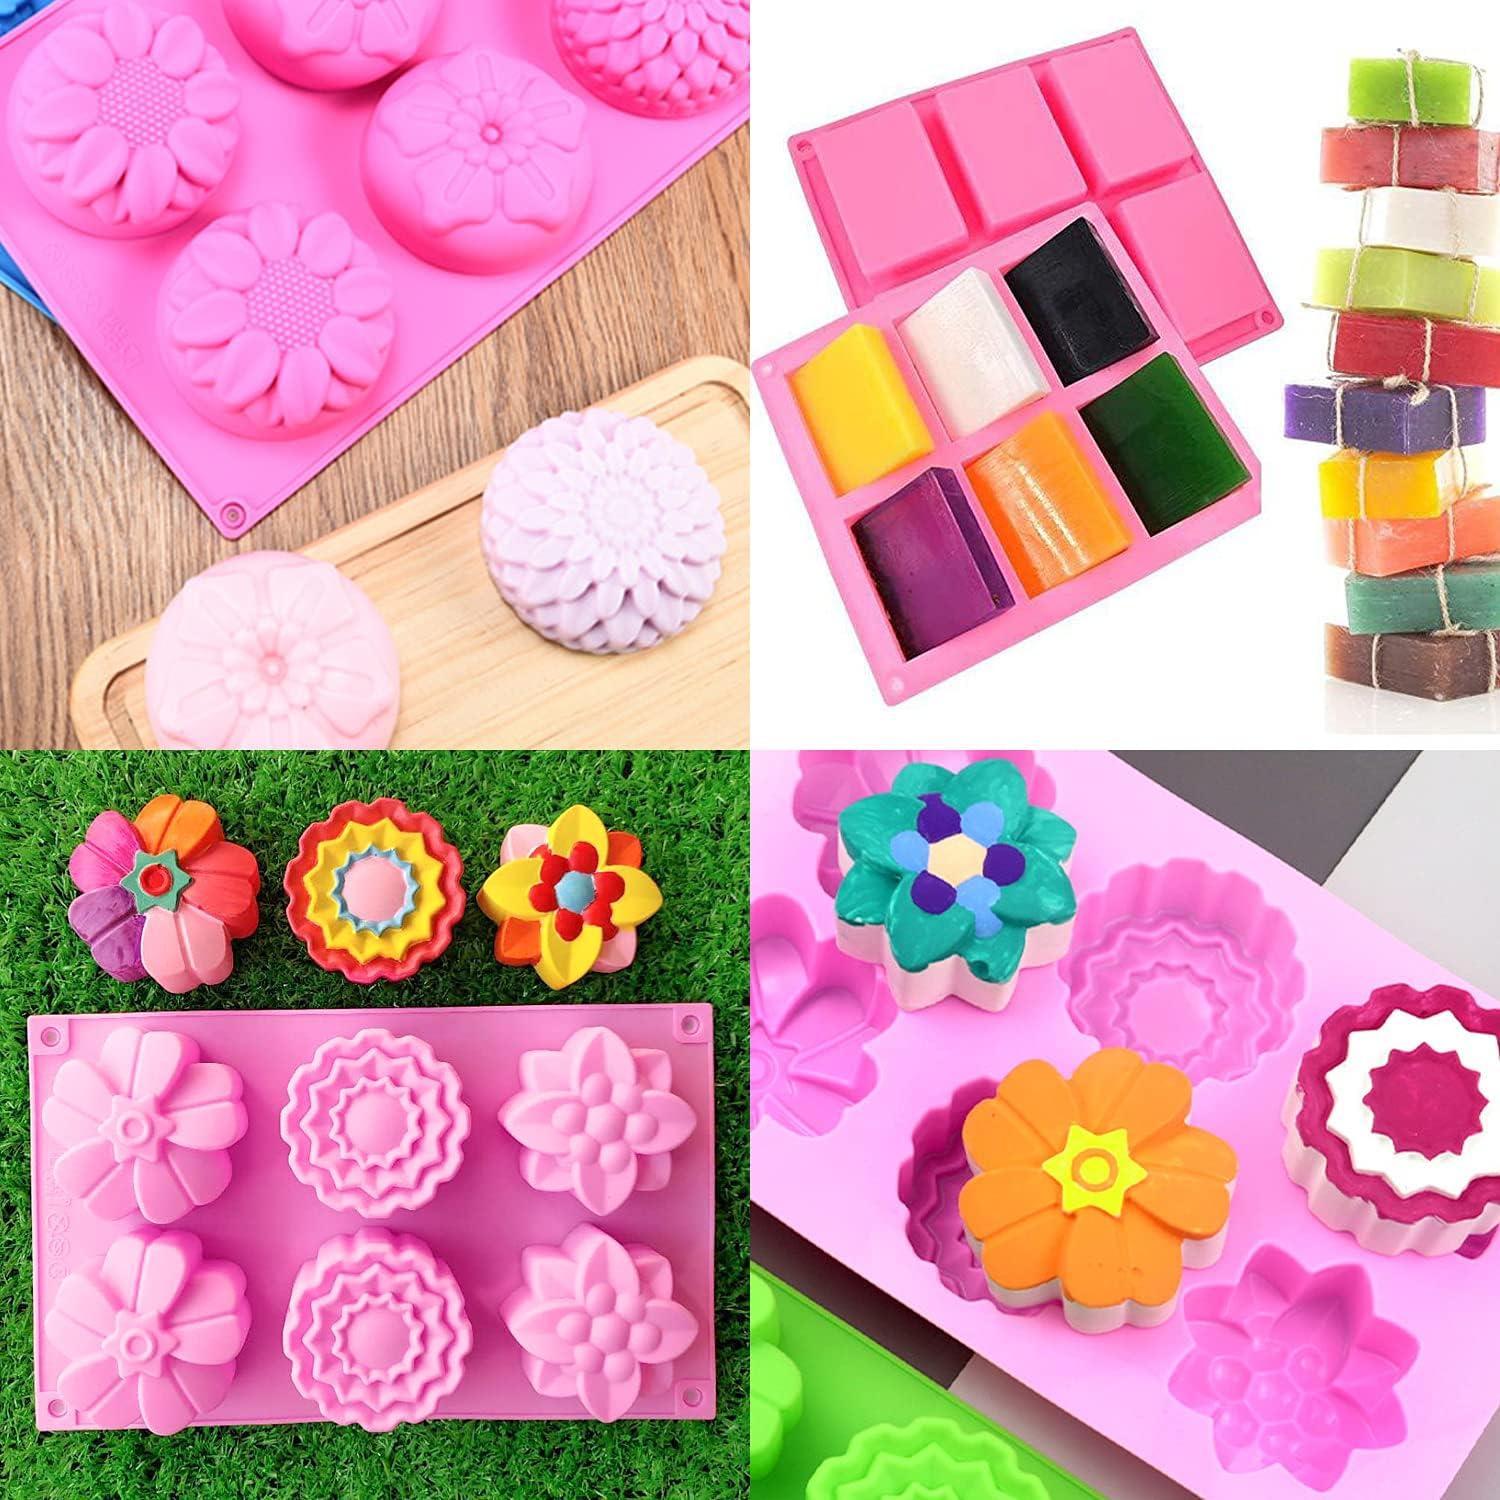 2pcs Handmade Square Silicone Mold With 6 Cavities For Soap, Cake